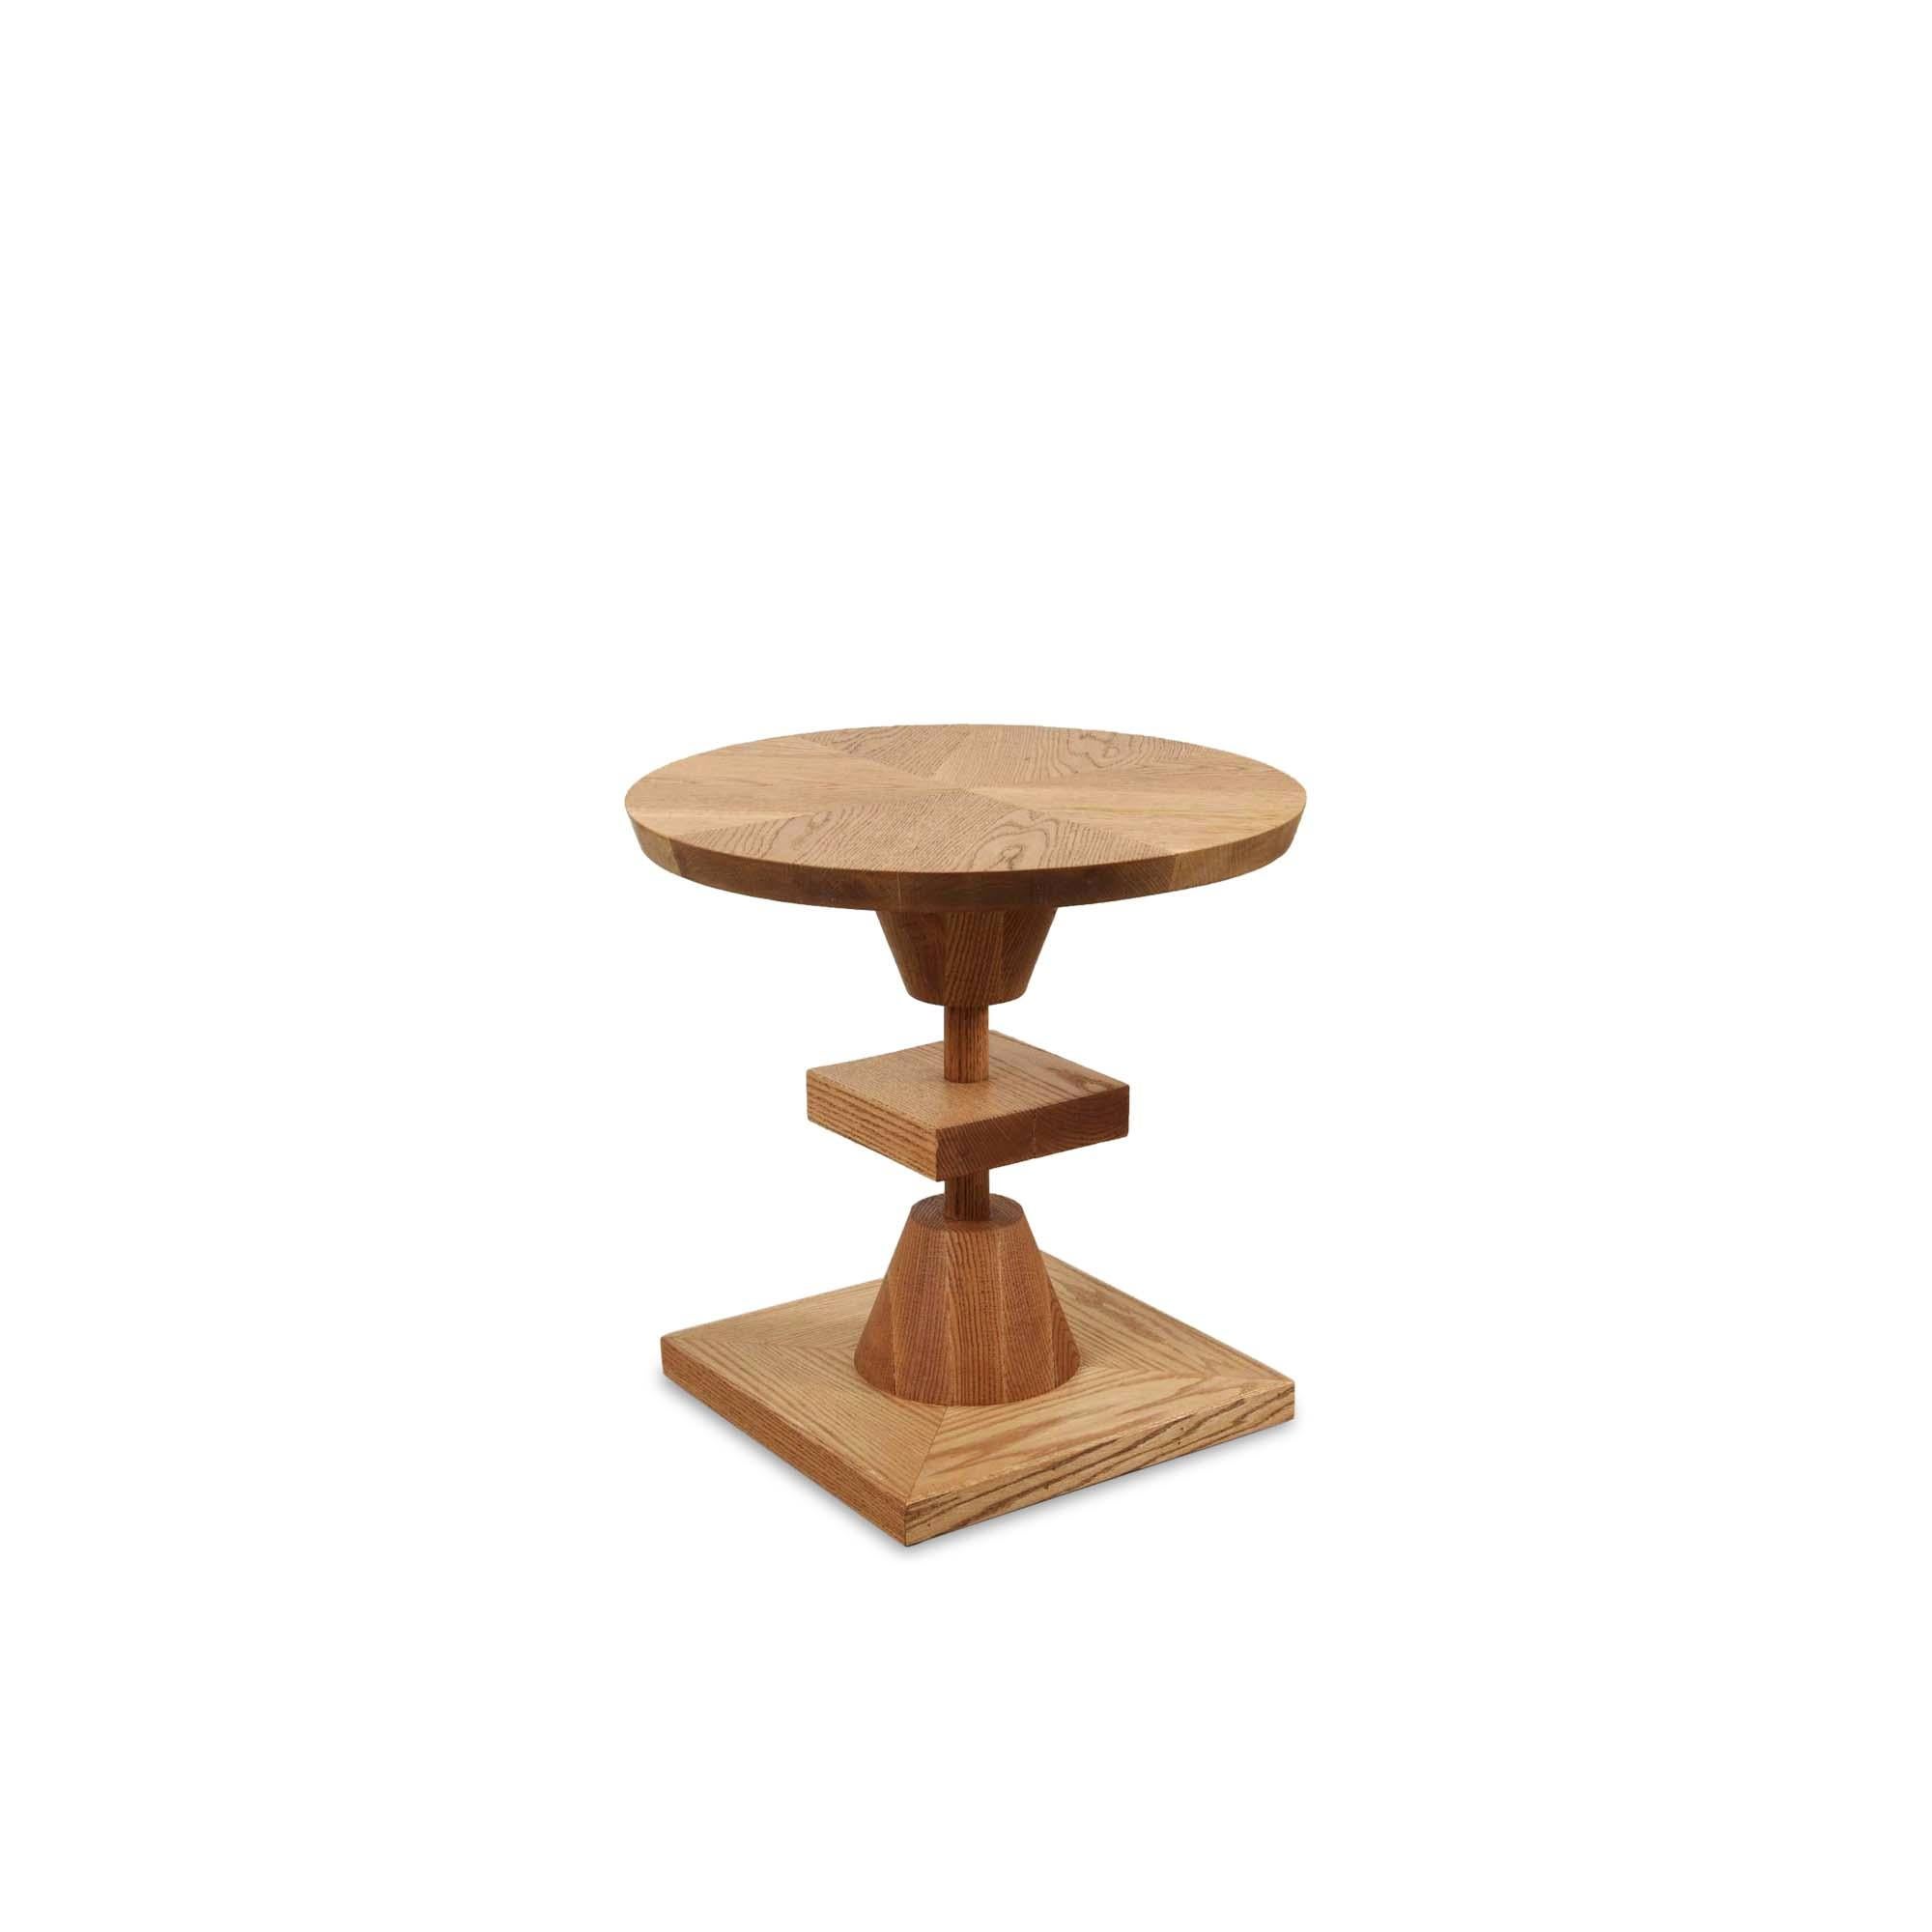 Oiled oak morro table by Lawson-Fenning. The Morro table features a series of geometric shapes stacked on top of each other with solid wood details. Available in American walnut or white oak. 

The Lawson-Fenning Collection is designed and